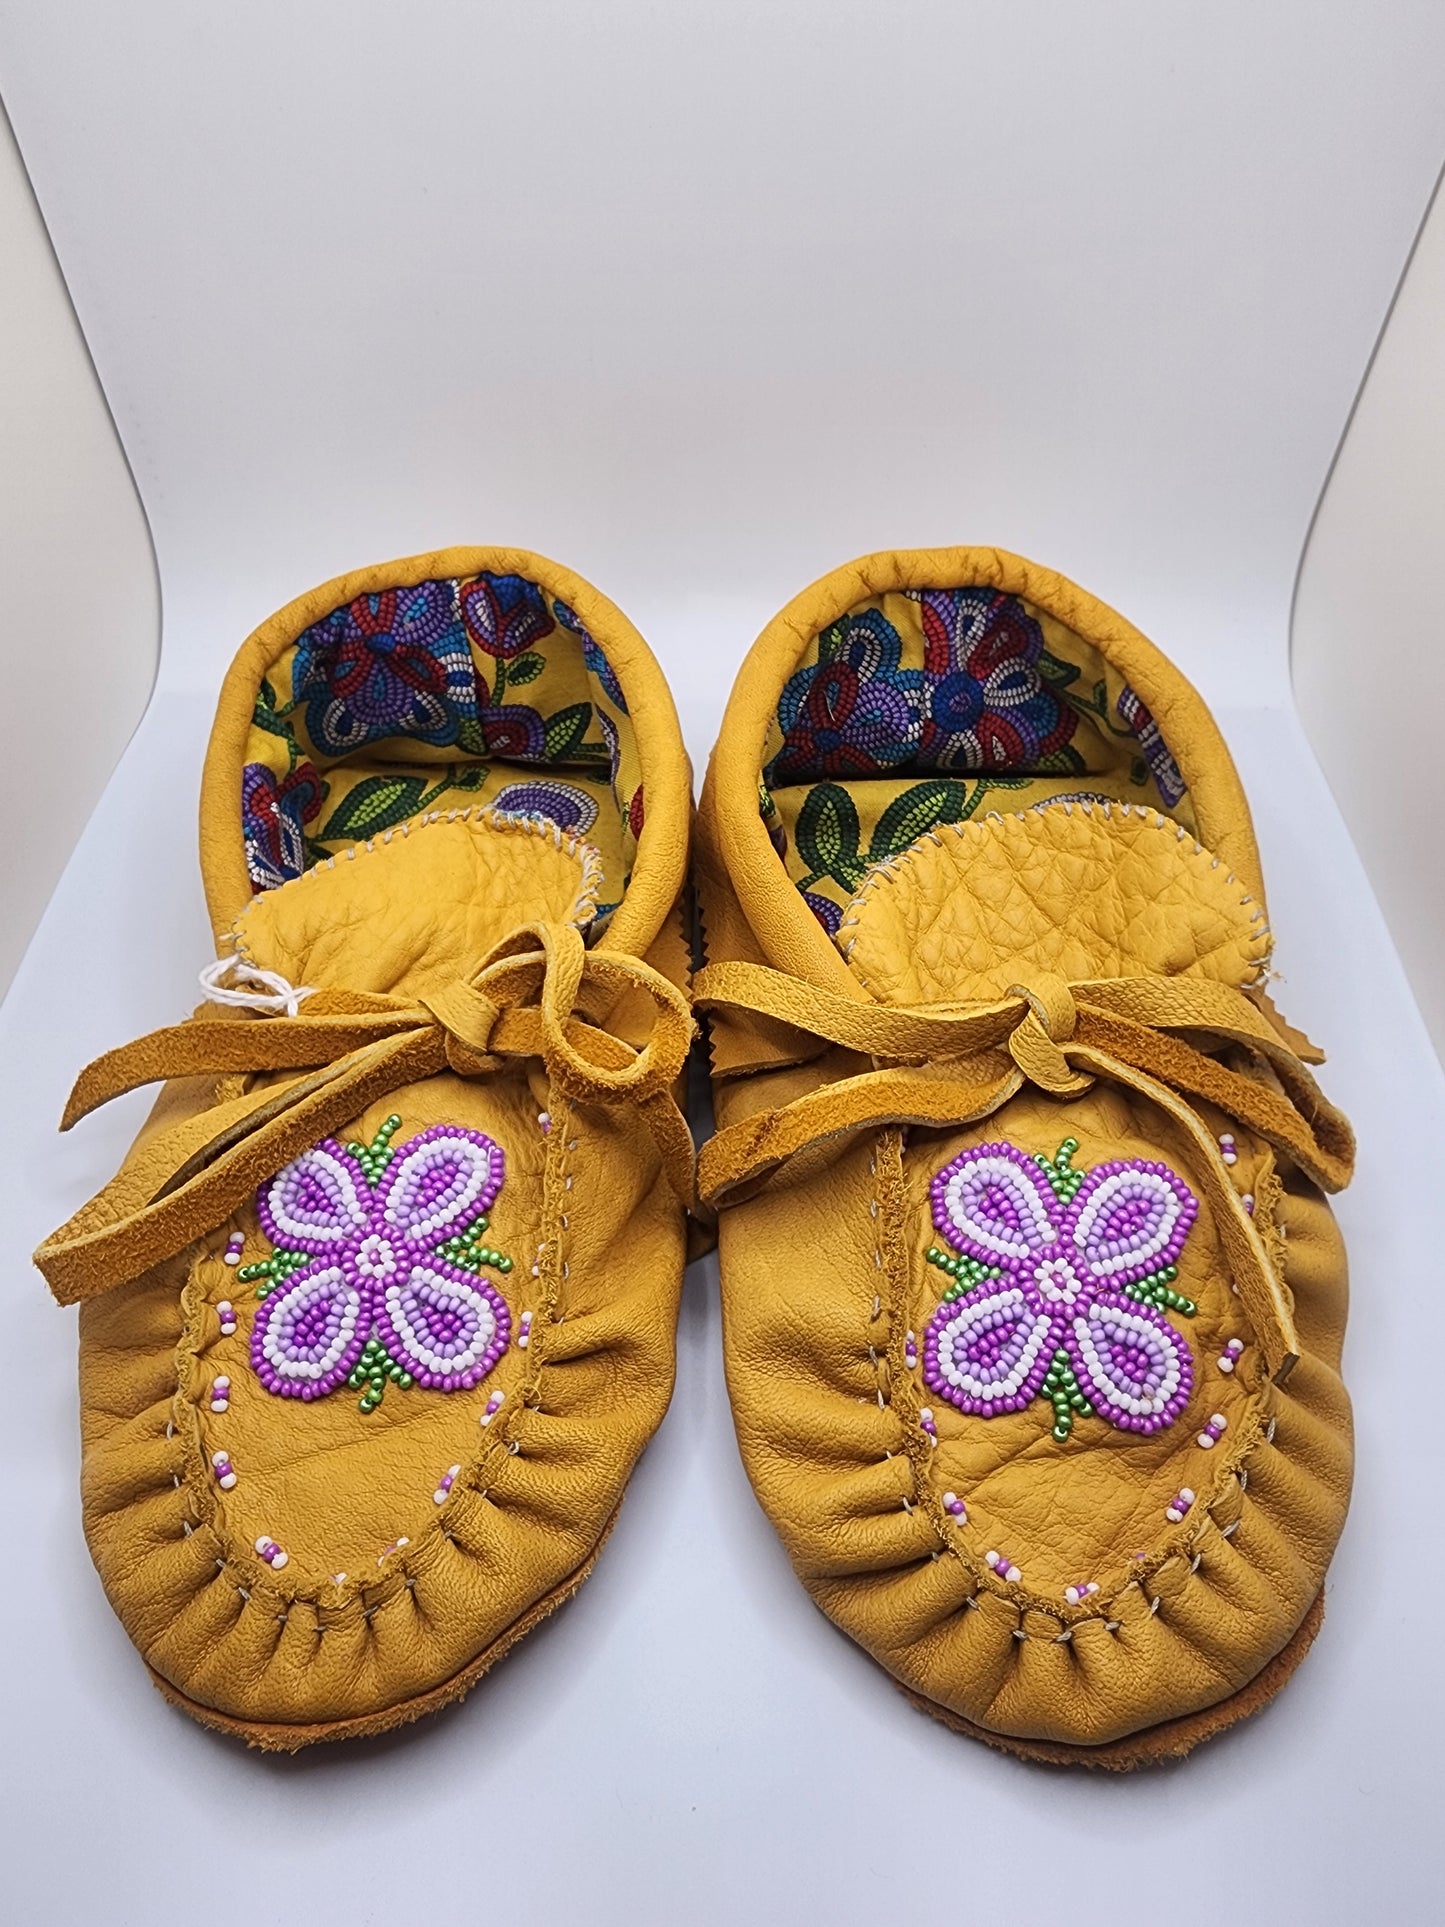 Leather Moccasins - Size 5(U.S.) - with Beaded Flower Design